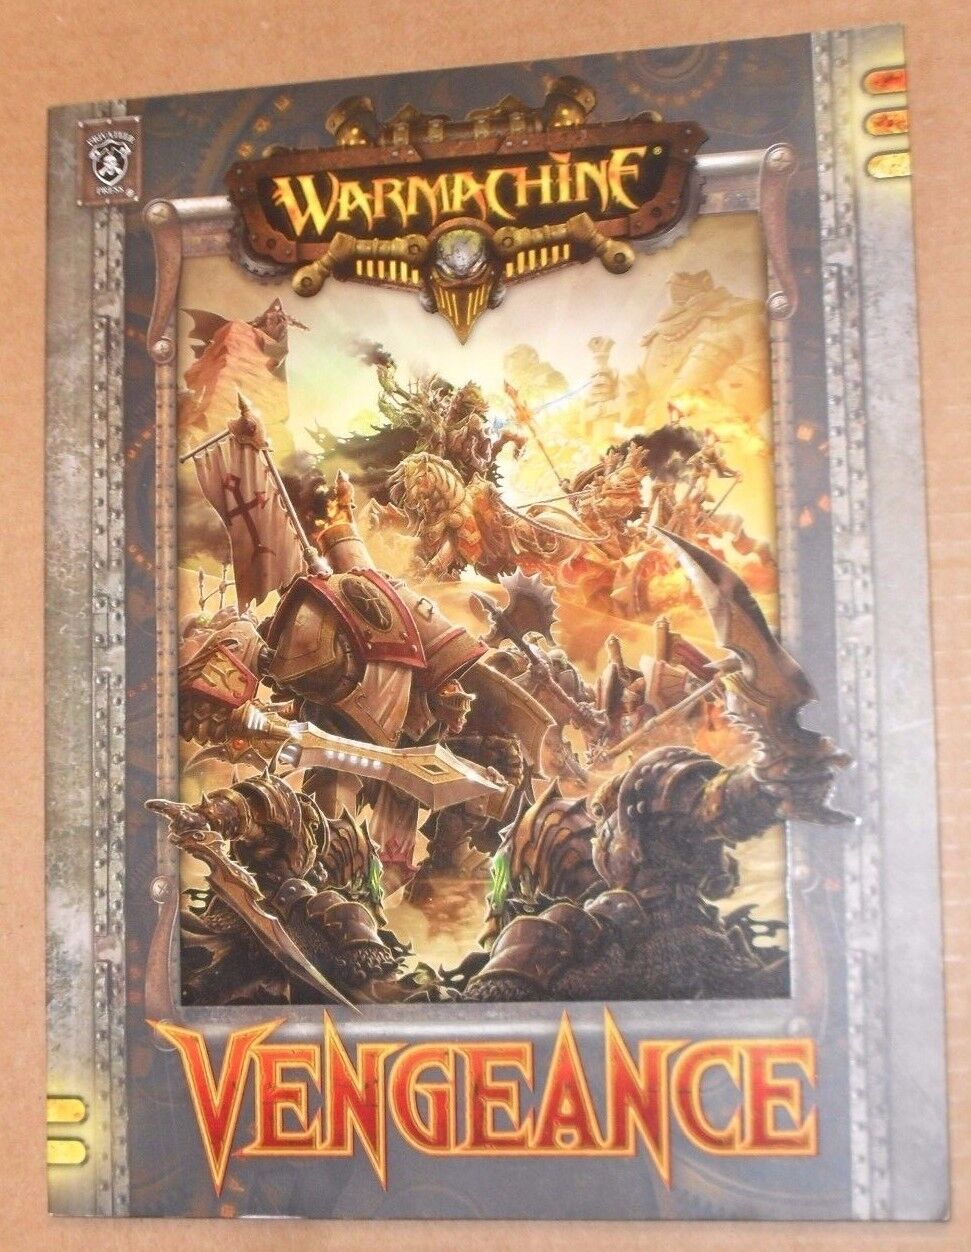 Warmachine: Vengeance MkII expansion book soft cover 